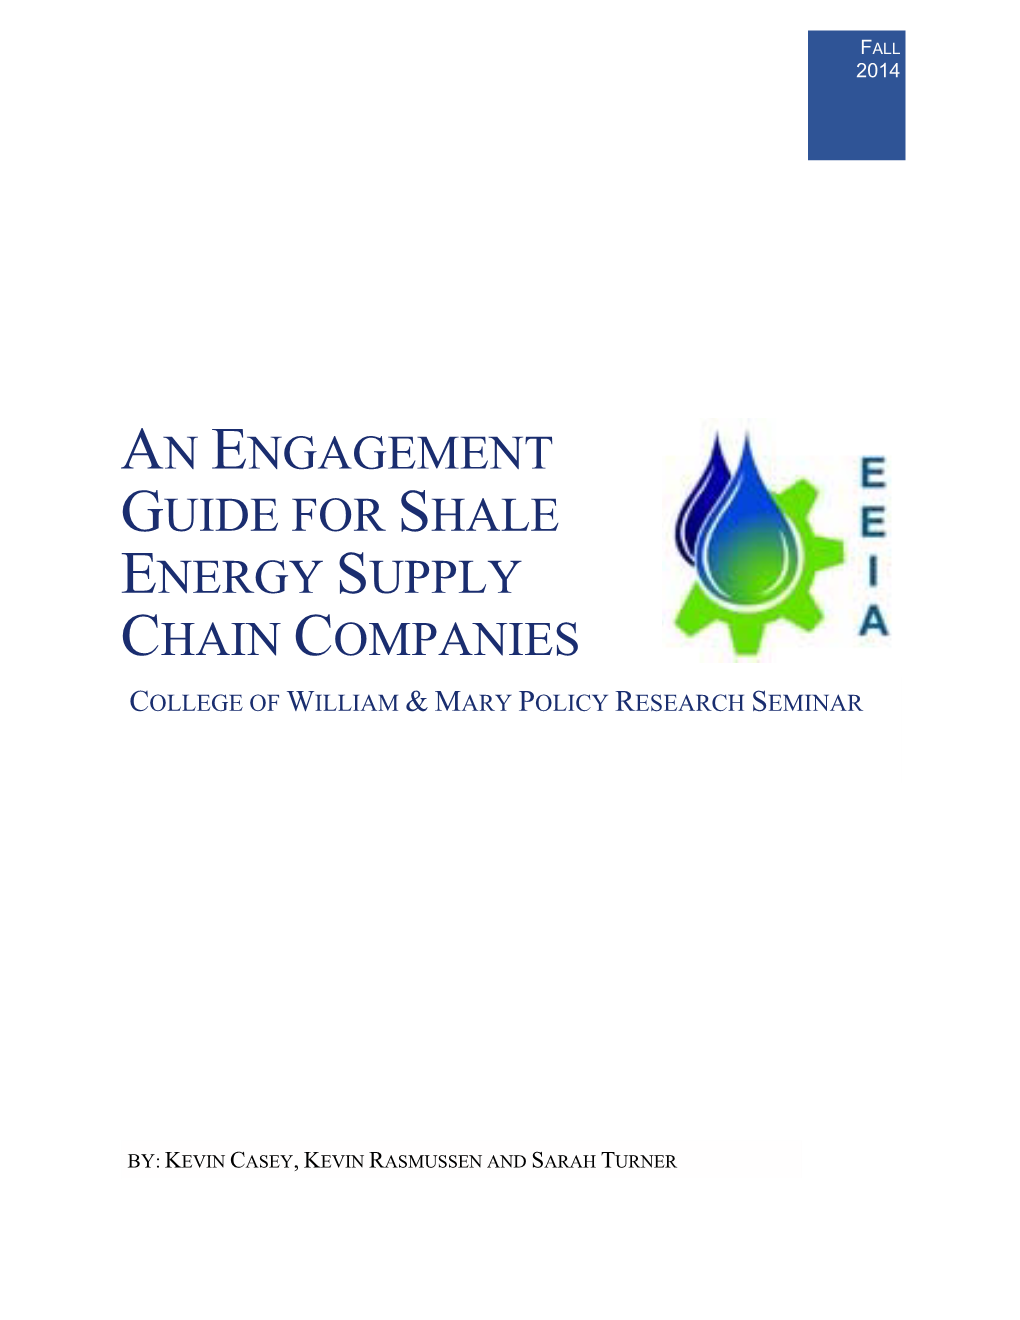 An Engagement Guide for Shale Energy Supply Chain